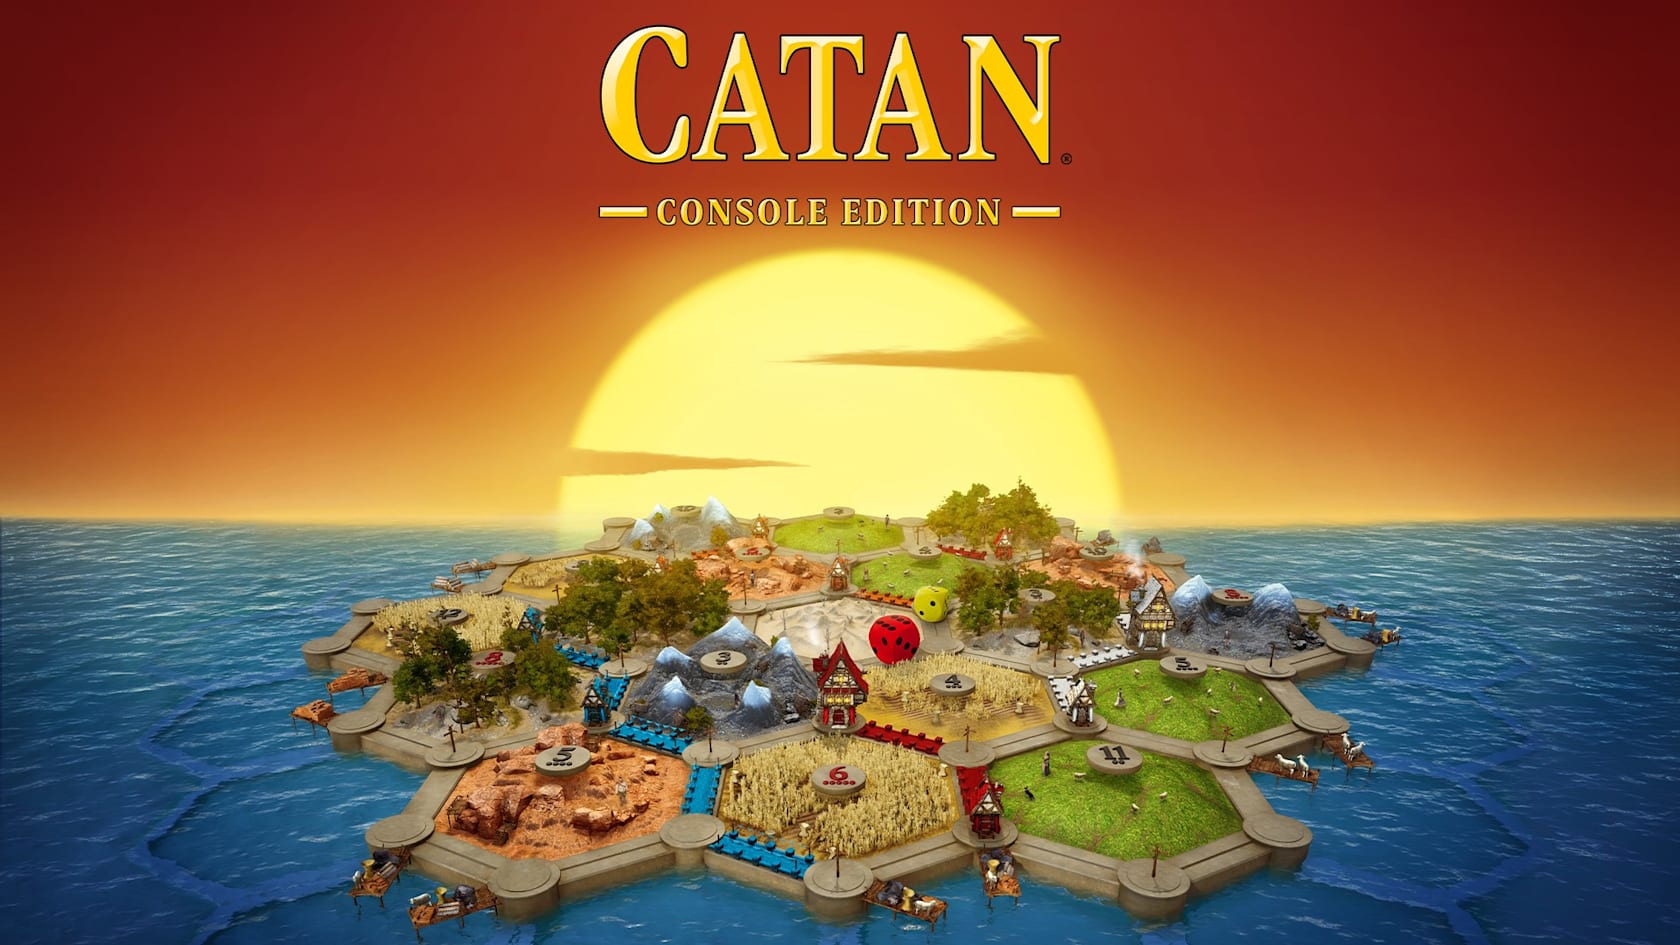 CATAN Comes To Switch